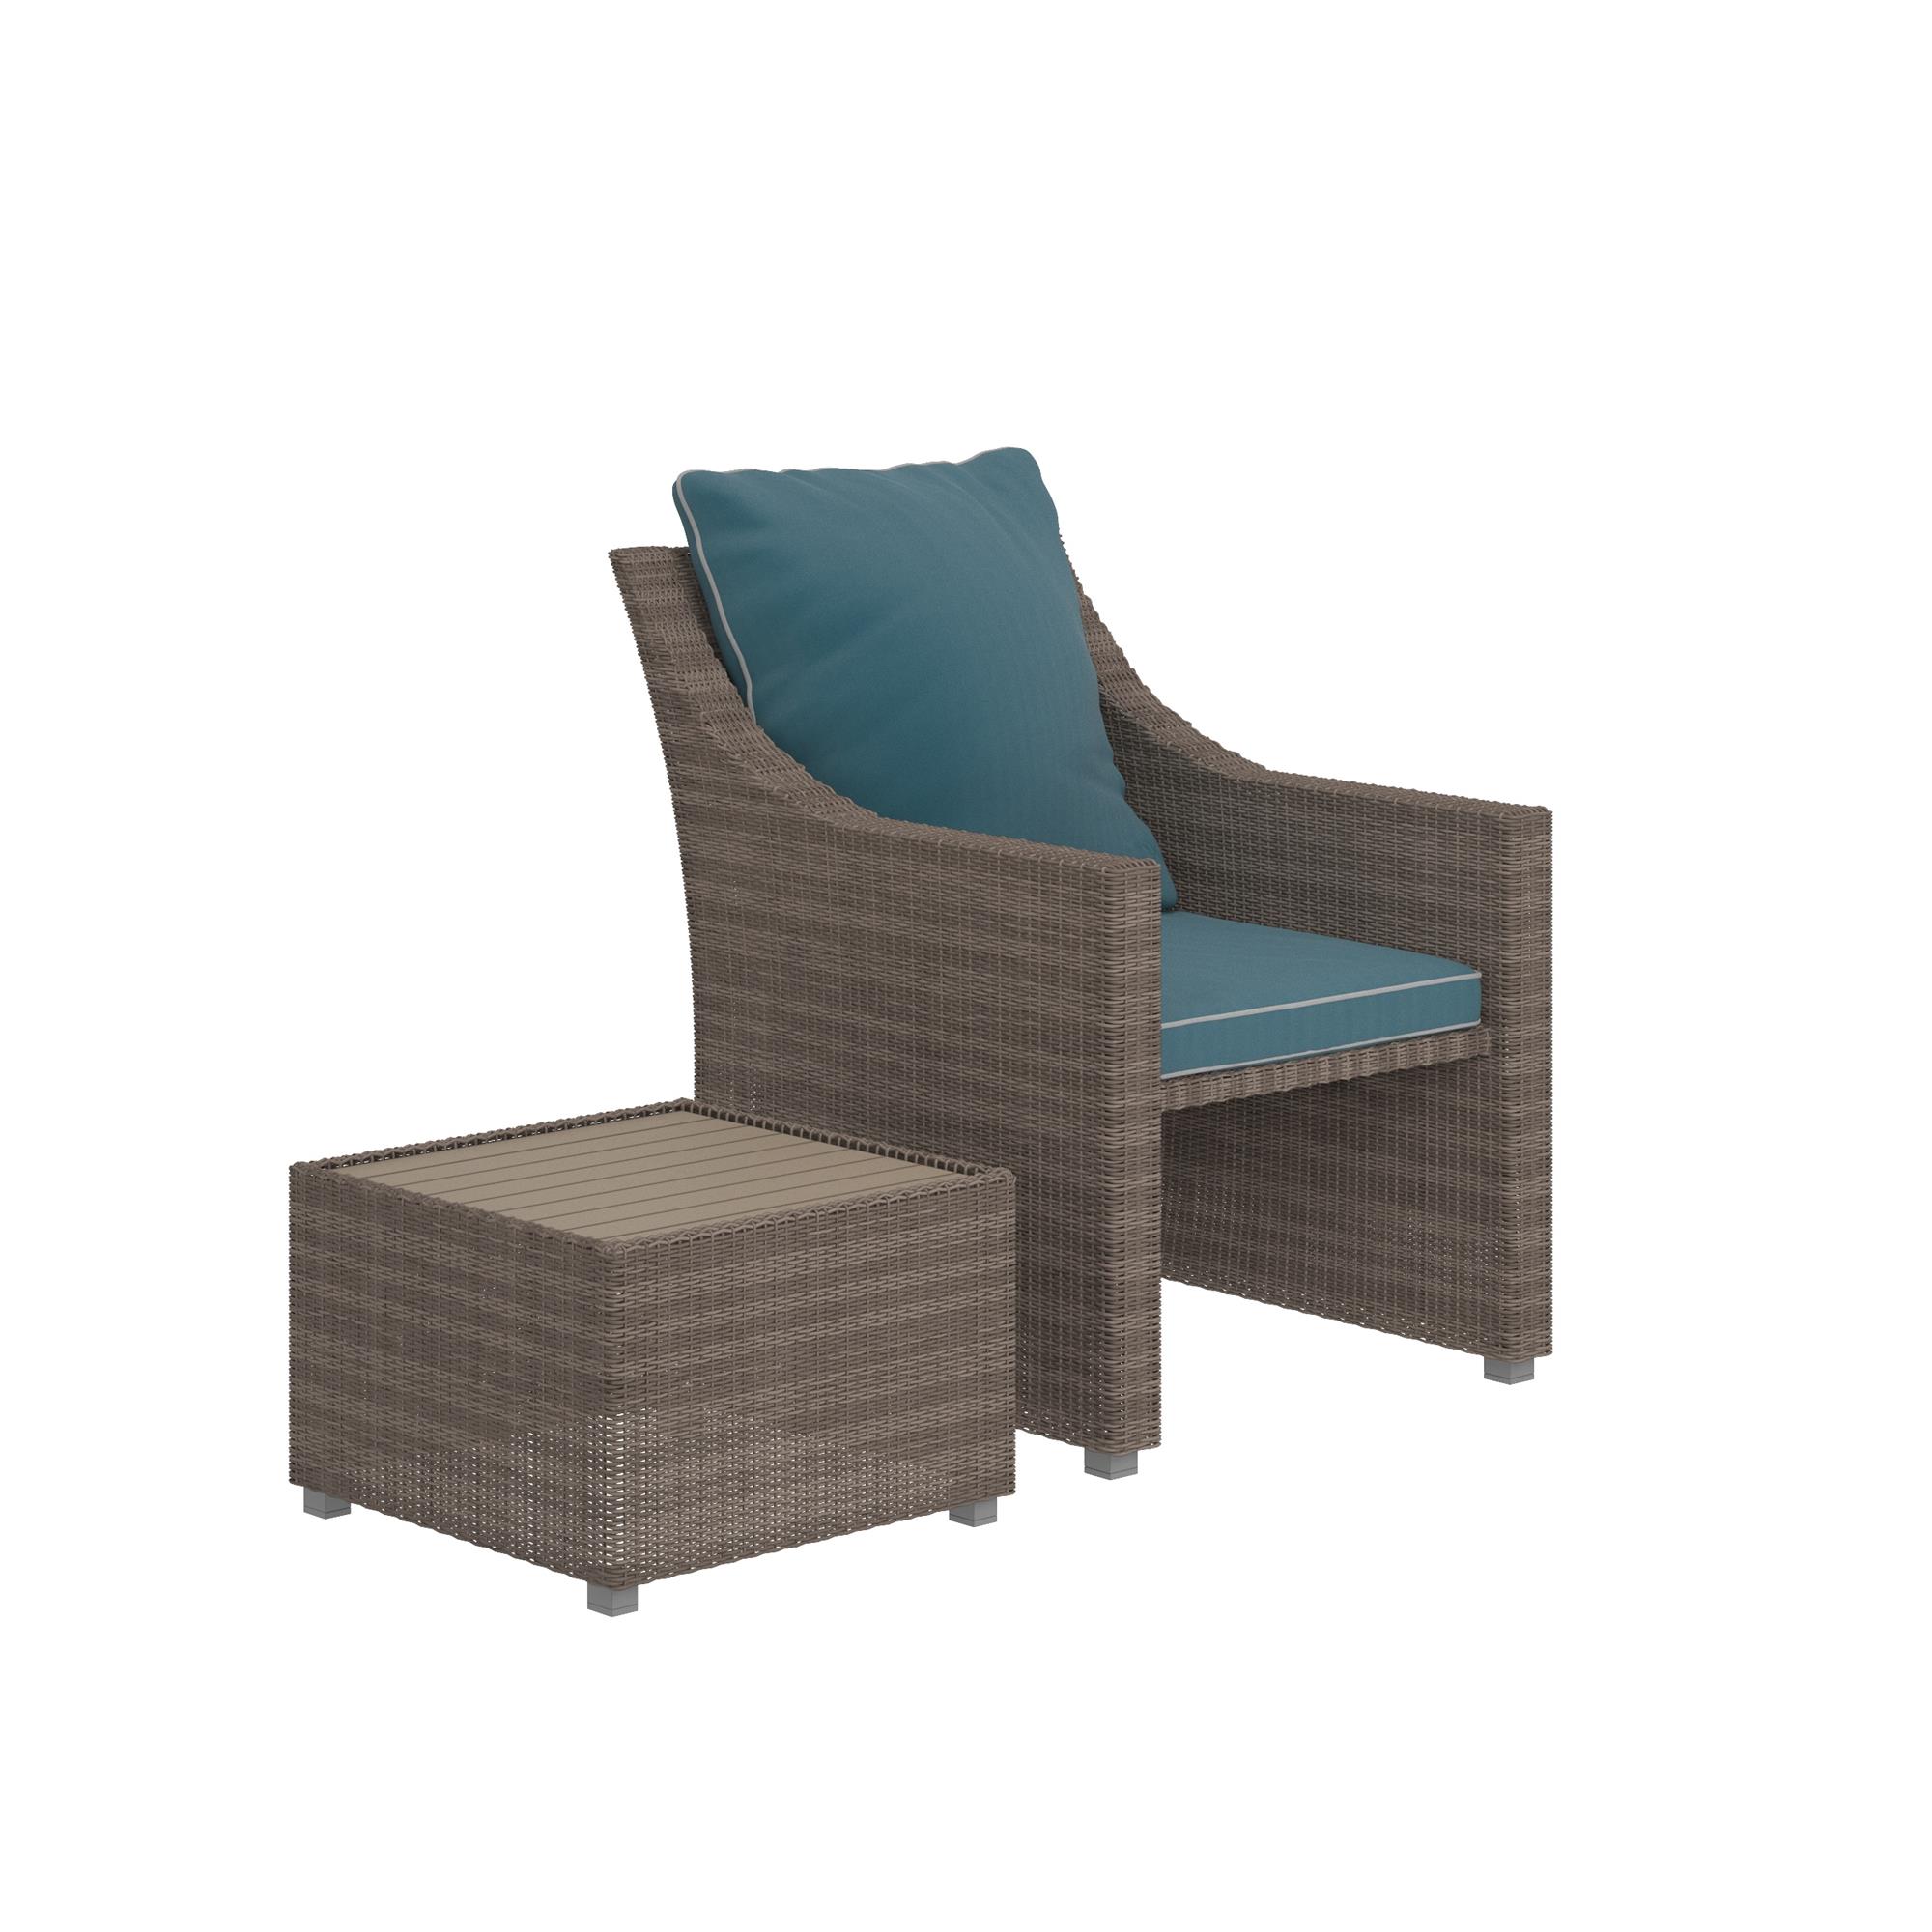 COSCO Outdoor, 2 Piece Patio Set, Lounge Chair, Multifunctional Ottoman/Table, Gray Wicker, Teal Blue Cushions - image 3 of 9